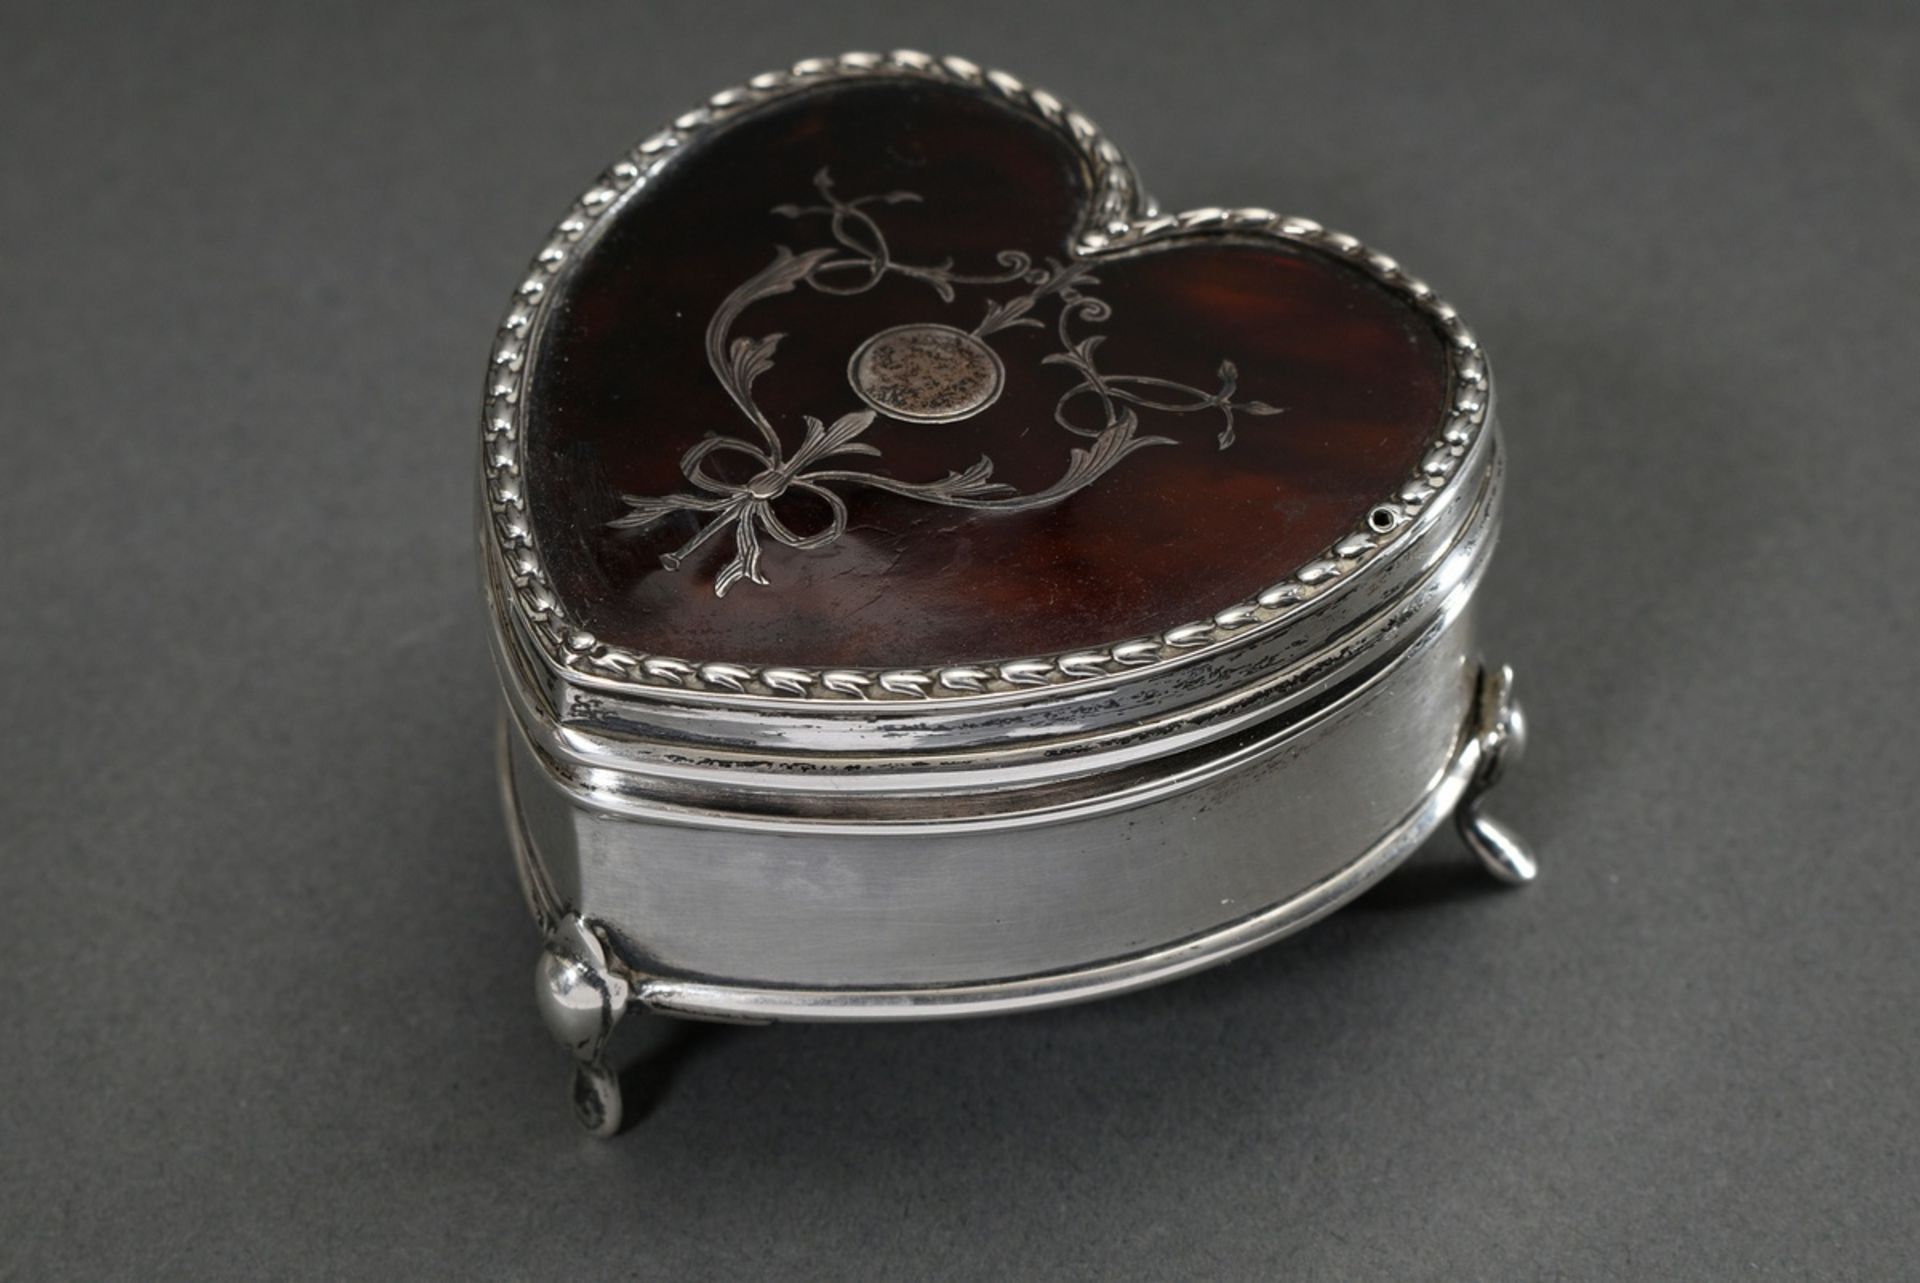 English jewellery box in the shape of a heart with ornamental inlays in the tortoiseshell lid and s - Image 4 of 7